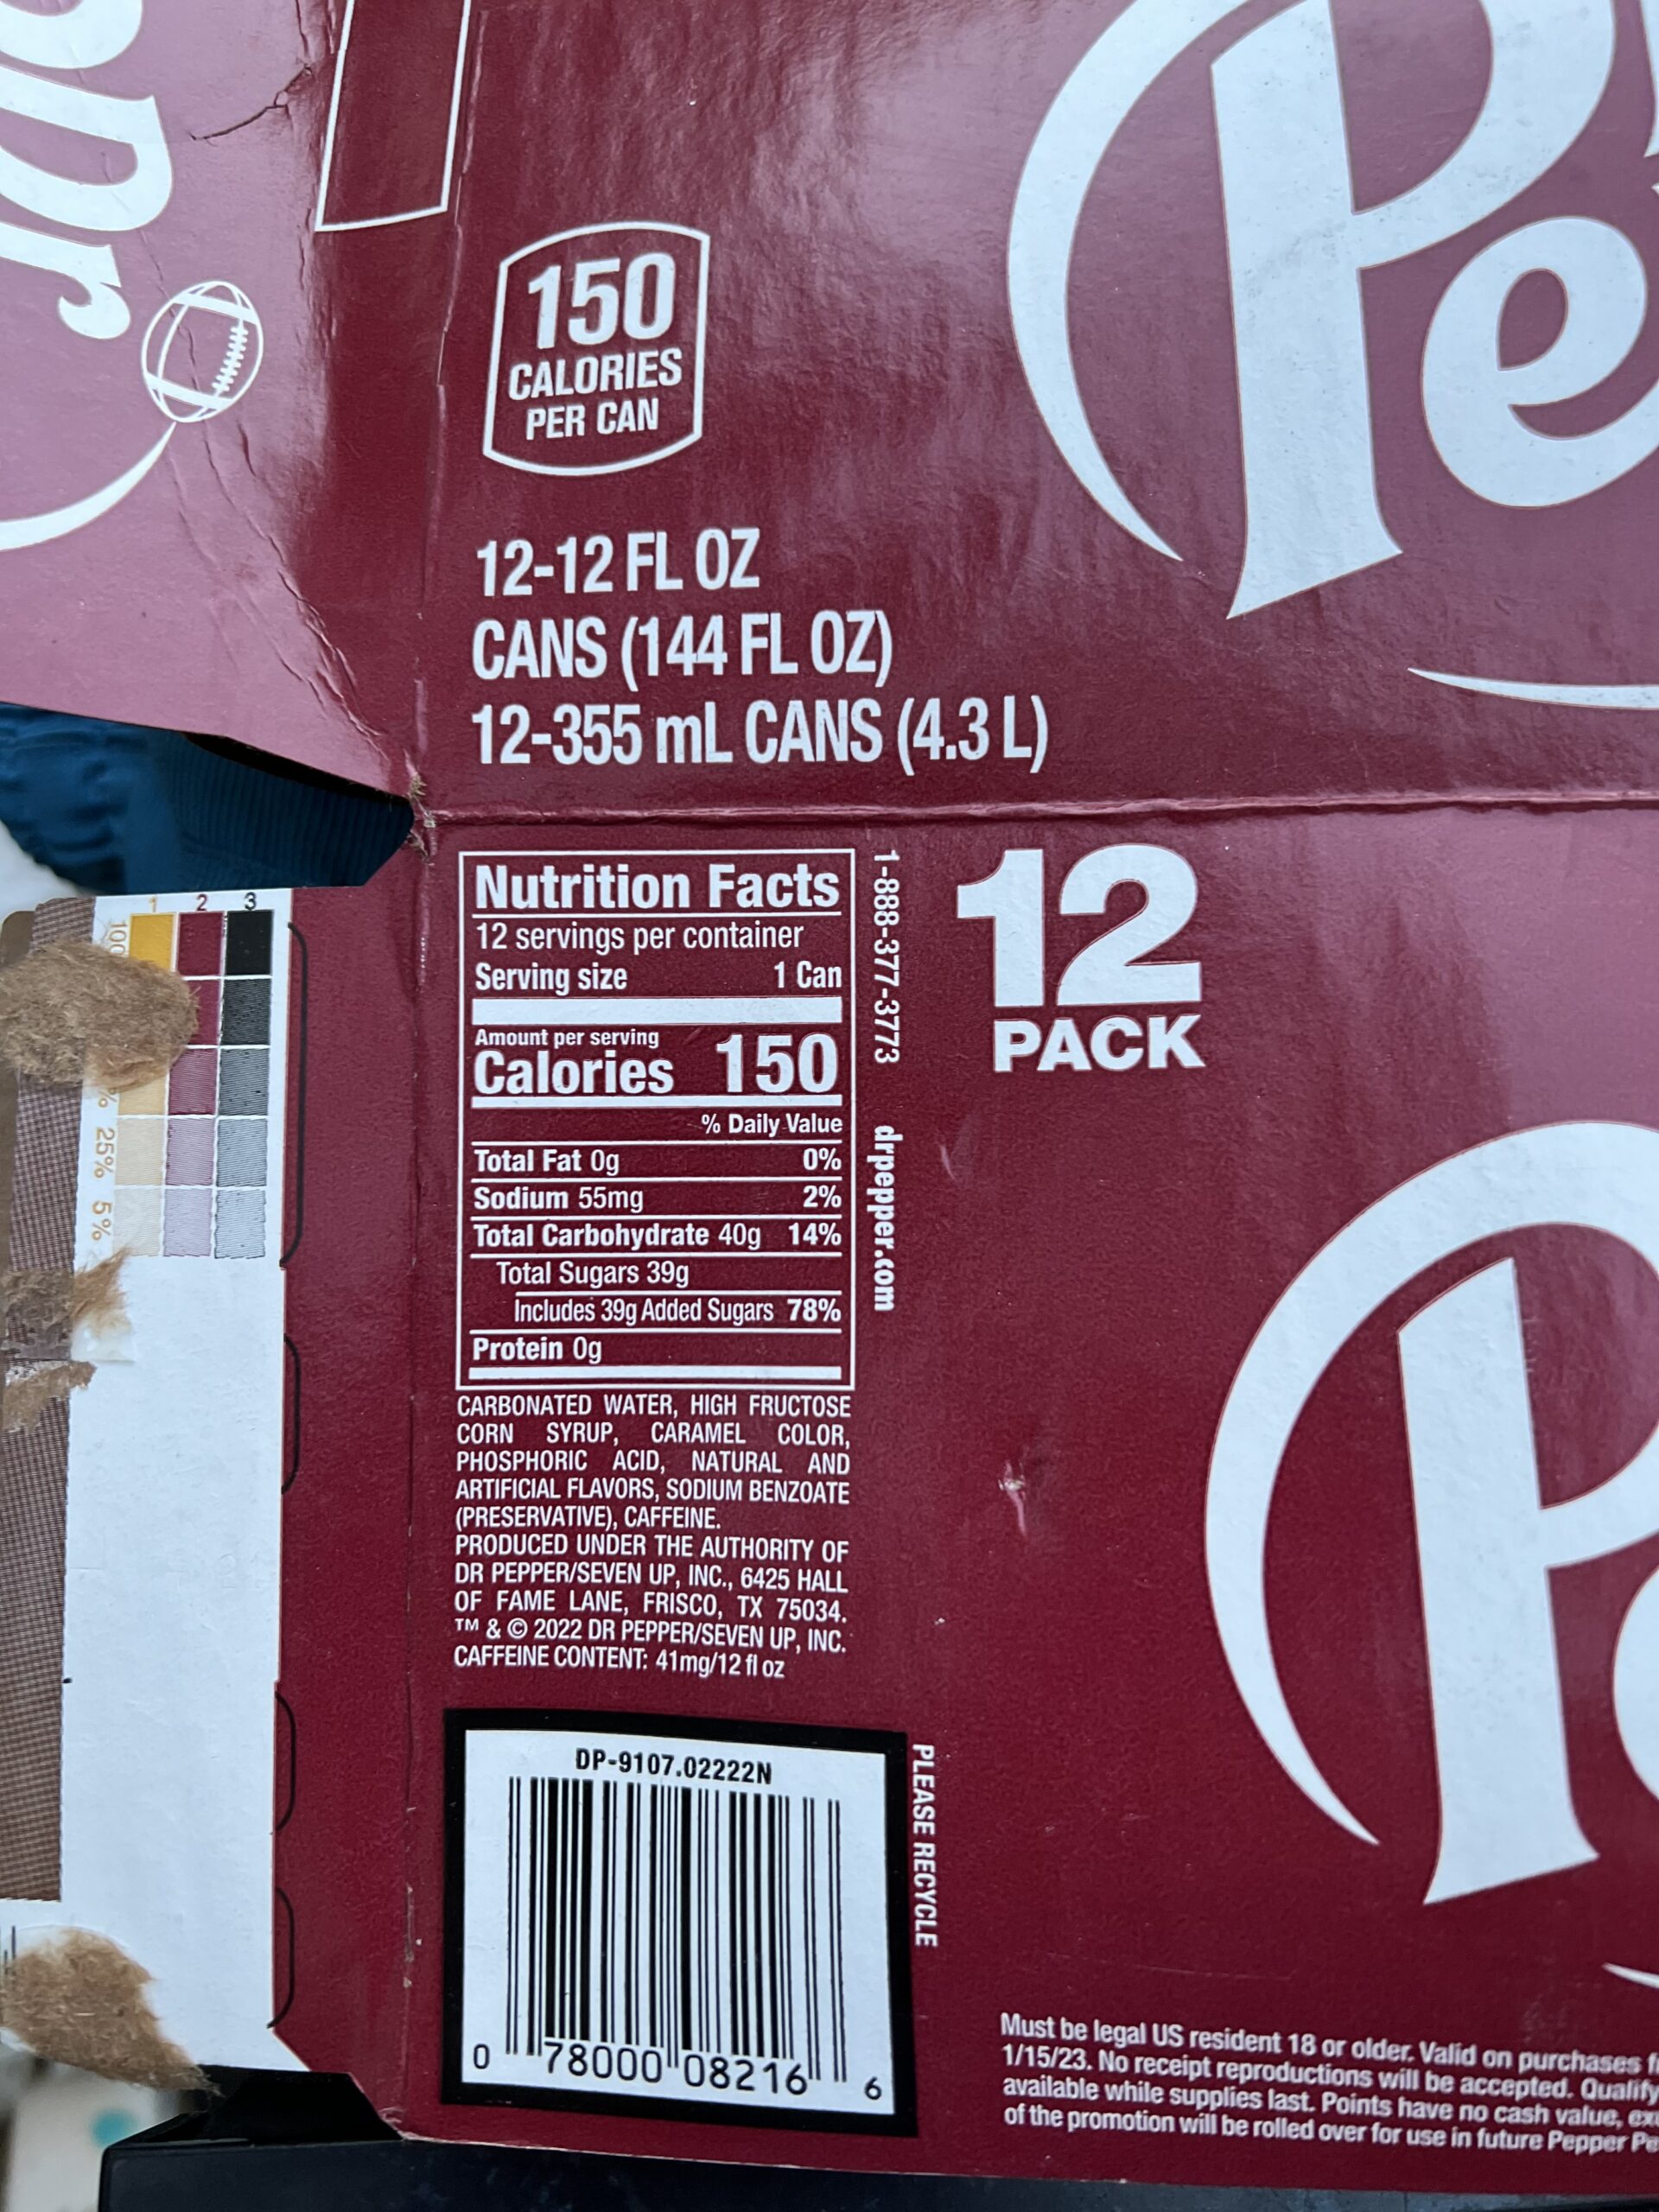 The 12 pack of soda is bad